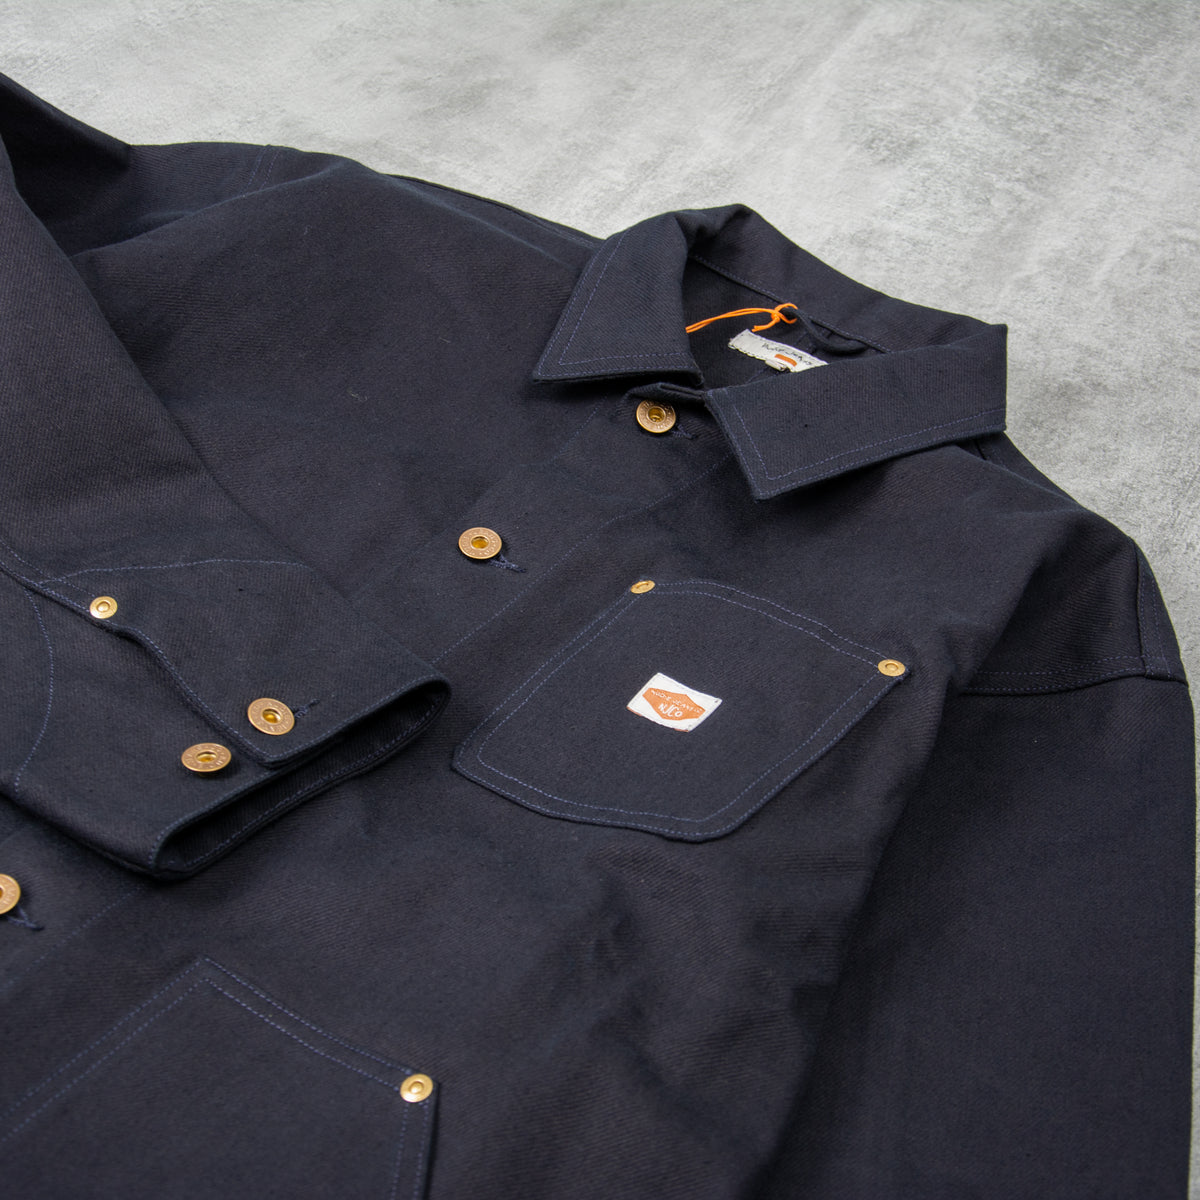 Buy the Nudie Chore Jacket Rebirth in Navy @Union Clothing | Union Clothing